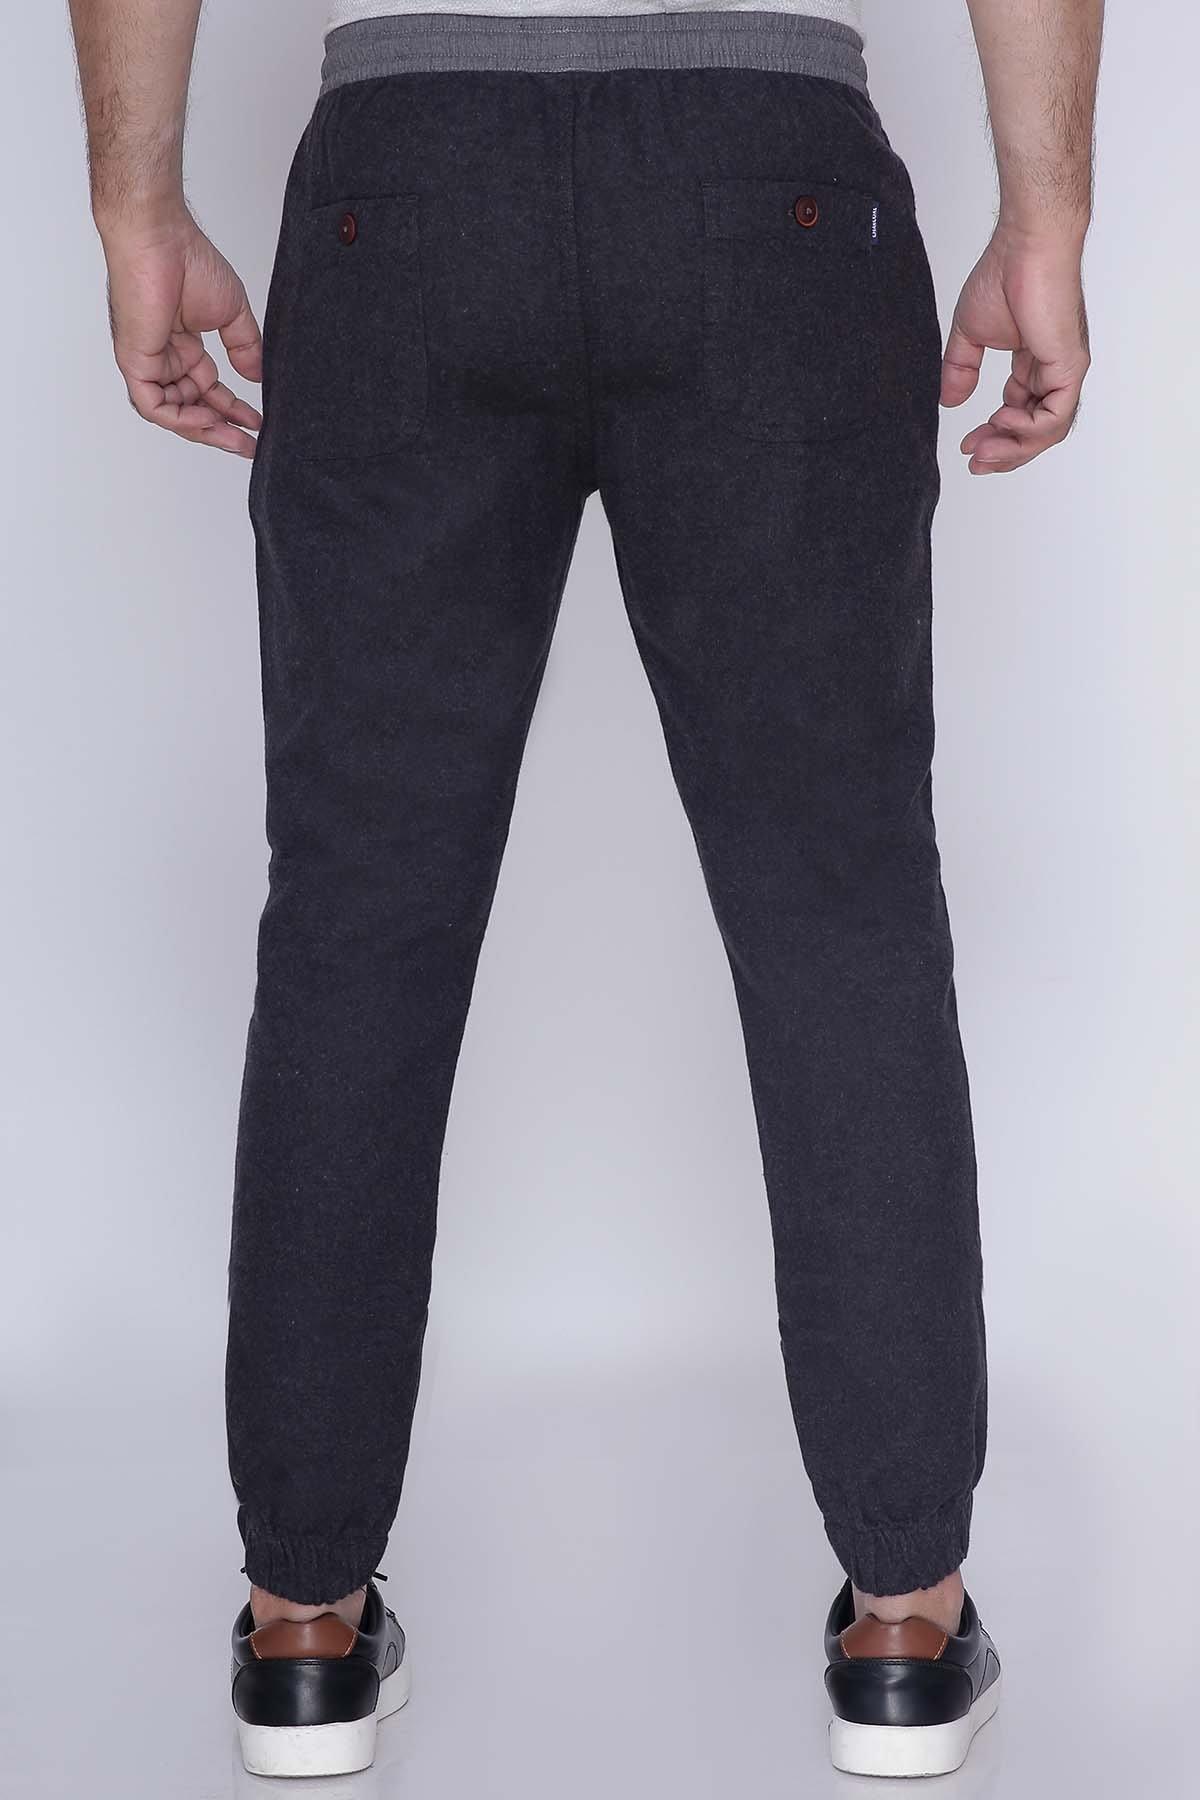 CASUAL TROUSER CHARCOAL at Charcoal Clothing